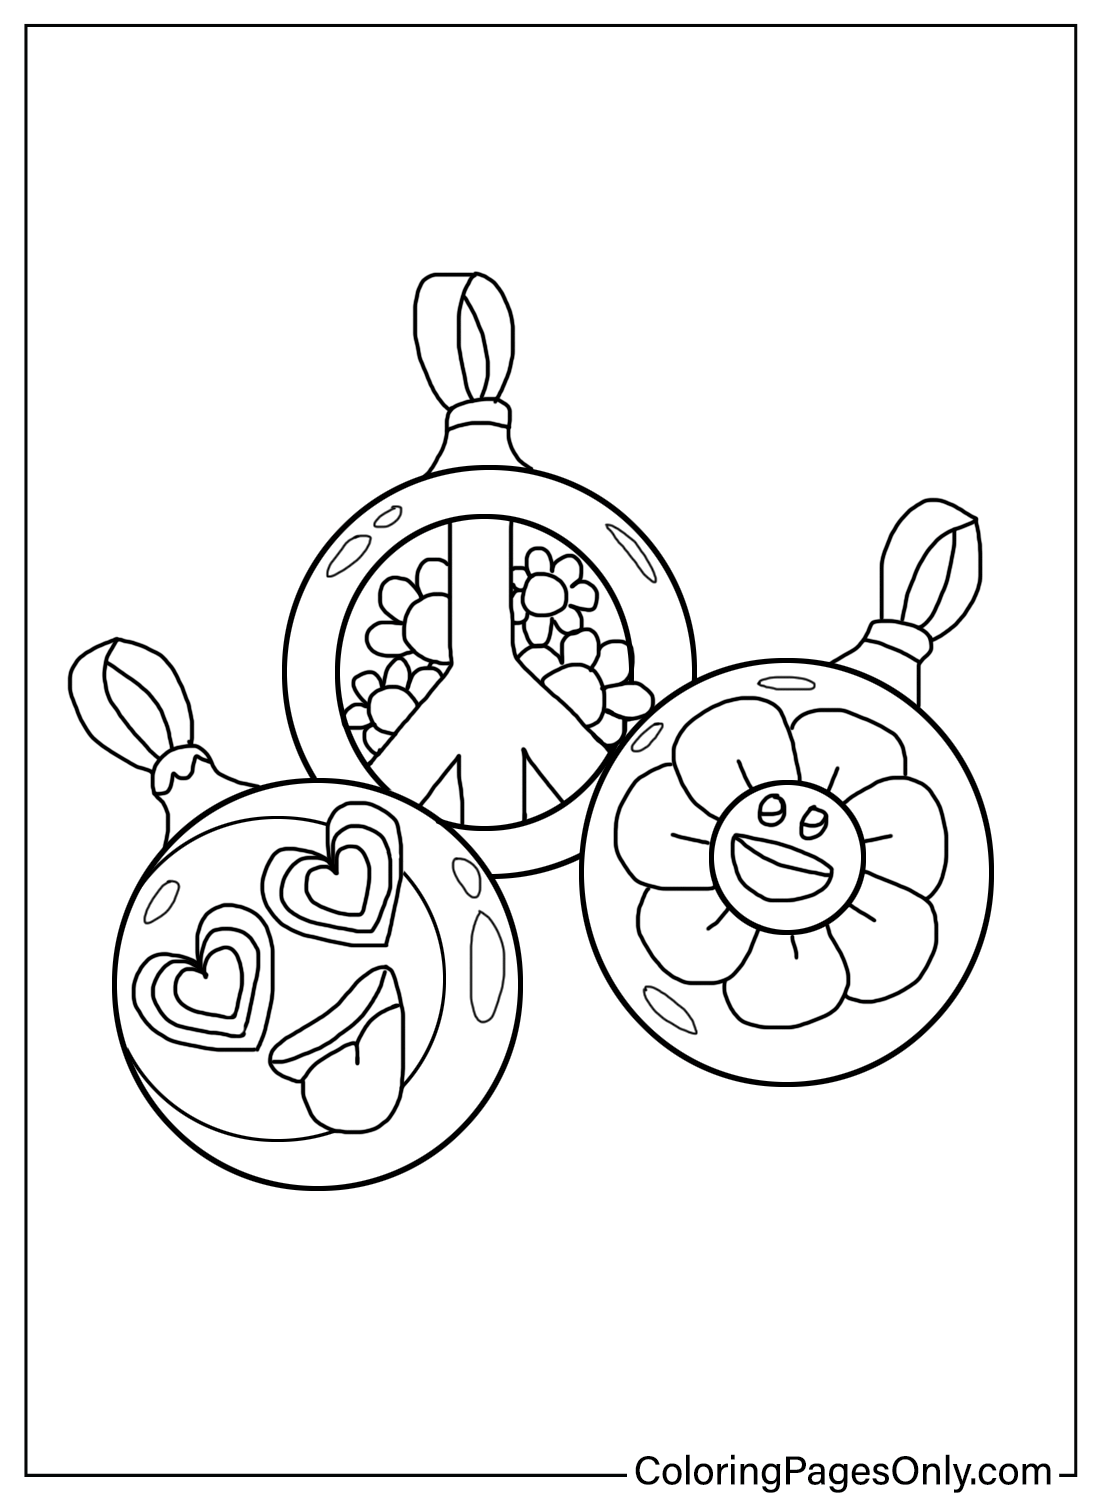 Coloring Page Hippie Christmas Balls from Hippie